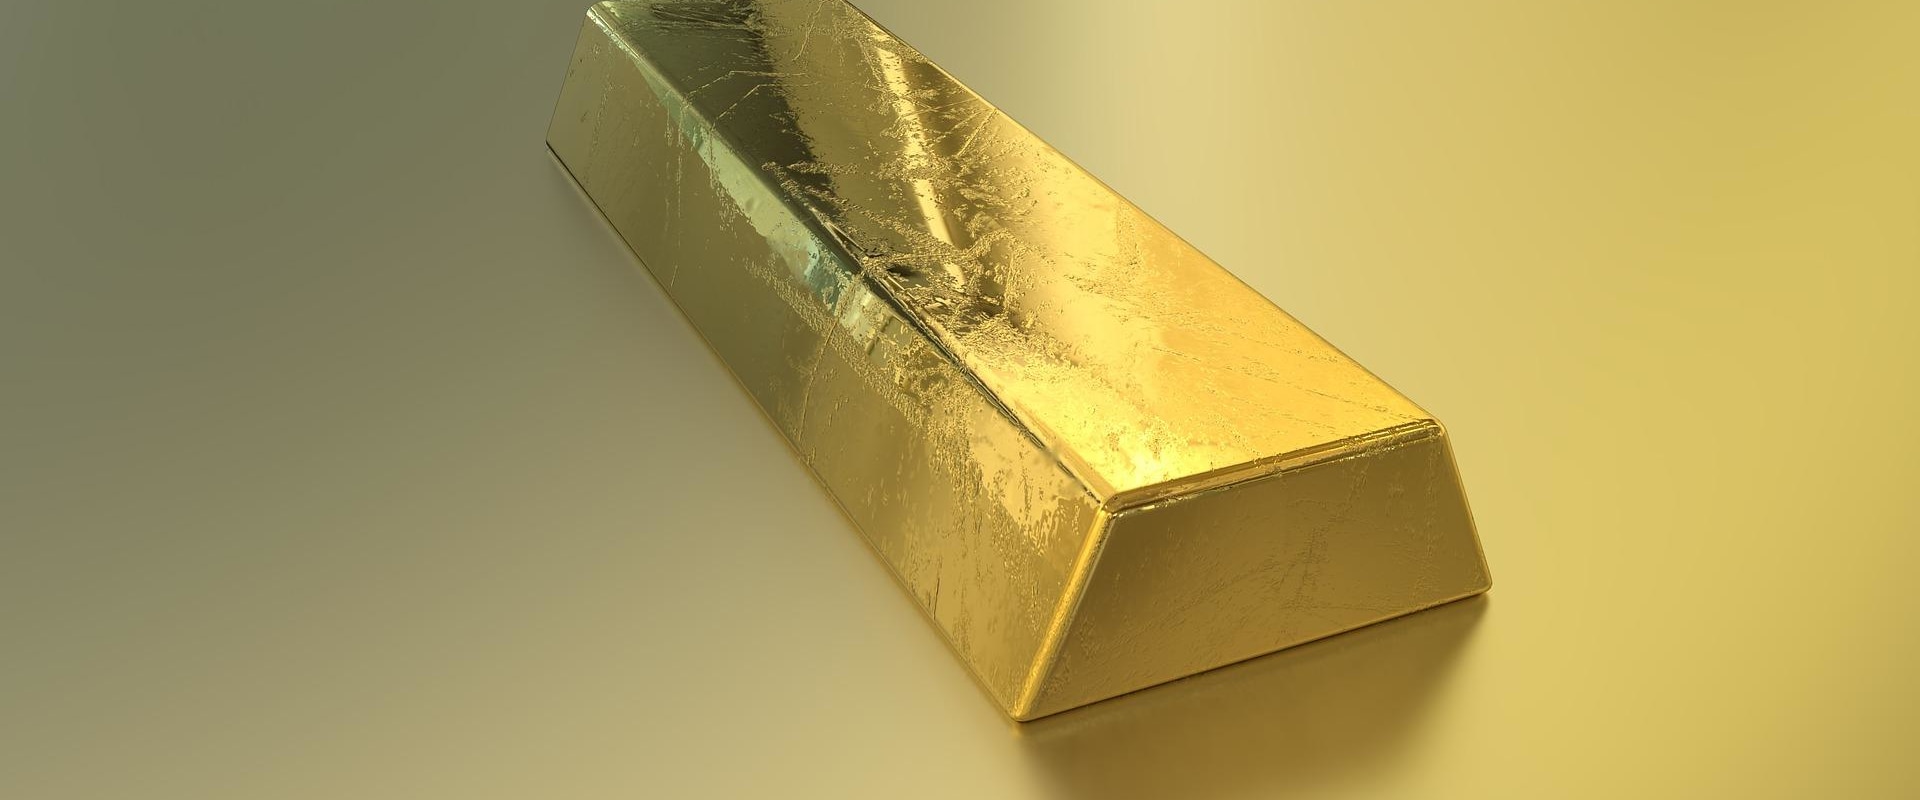 Does it matter what kind of gold bar you buy?